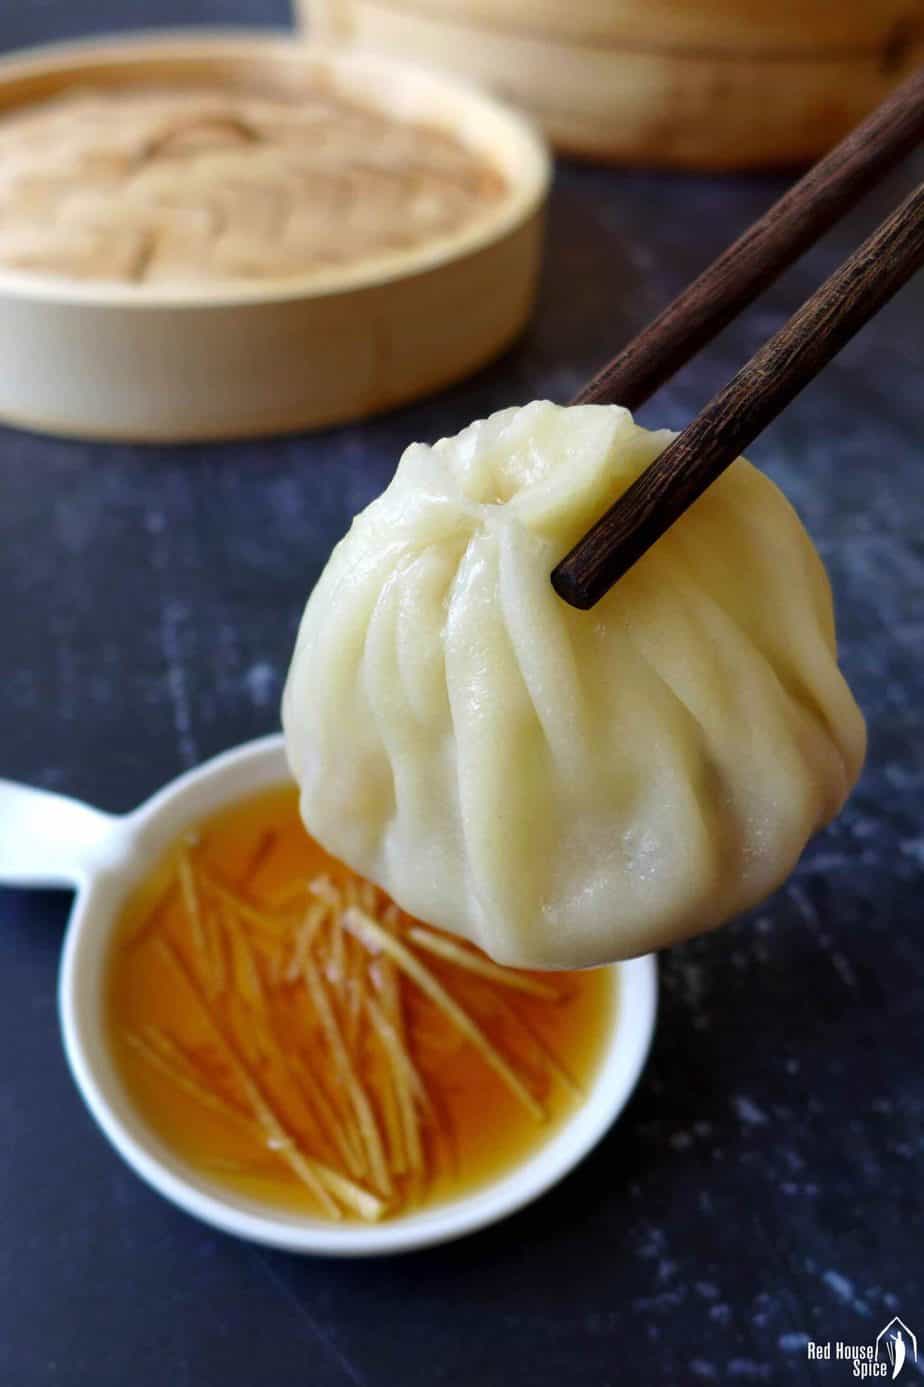 A soup dumpling picked up by a pair of chopsticks